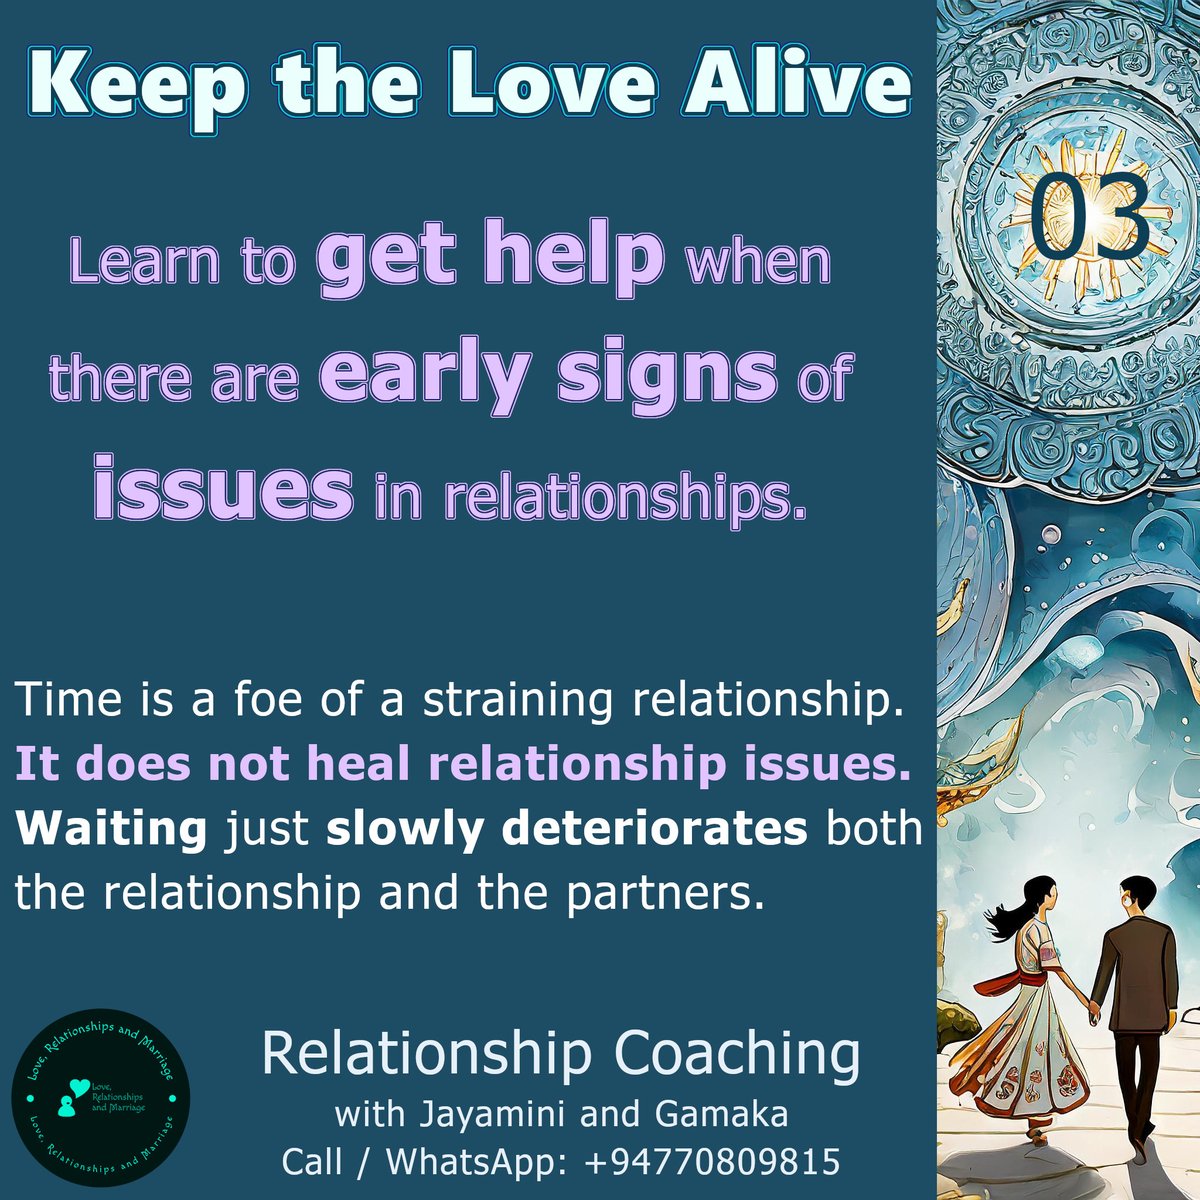 Learn to get help when there are early signs of issues in relationships.

Time is the foe of a straining relationship. It does not heal relationship issues. Waiting just slowly deteriorates both the relationship and the partners.

#Relationships #Love #Coaching #RelationshipCoach